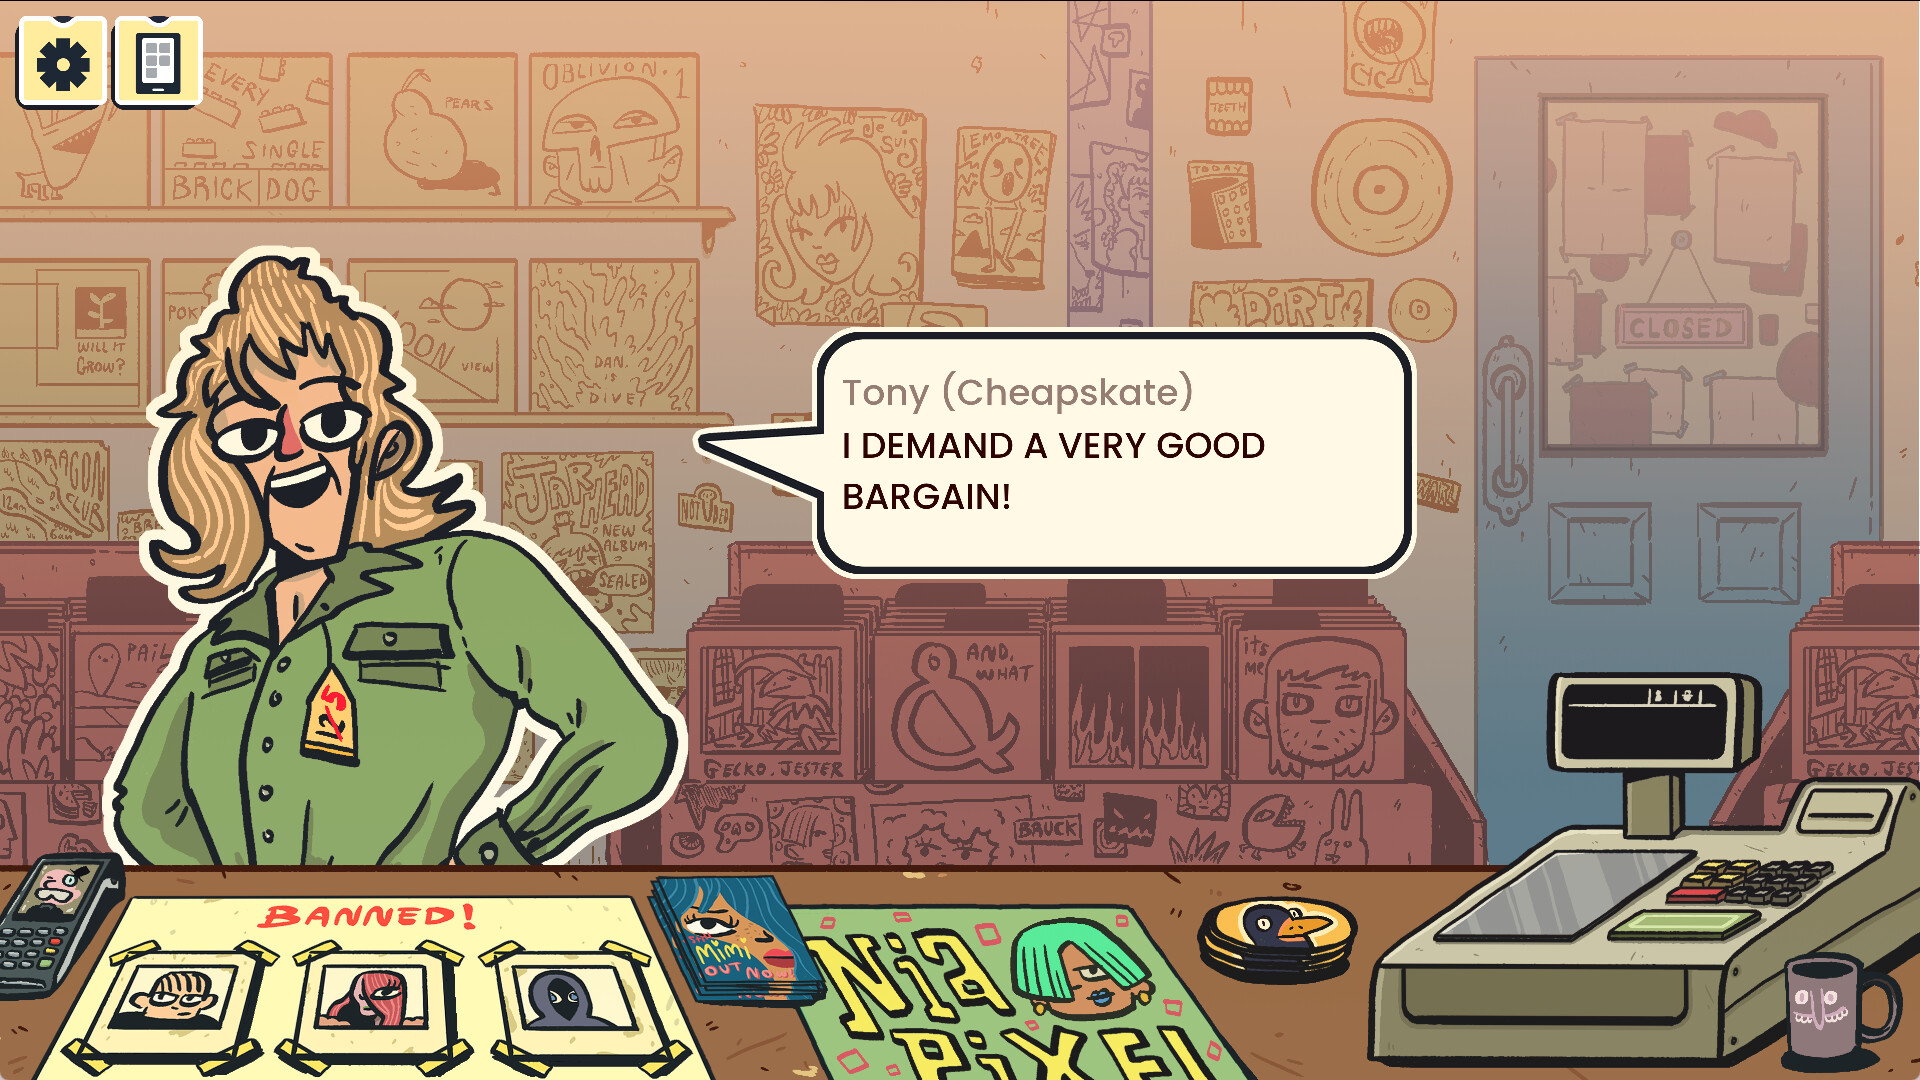 A screenshot from the game "Wax Heads:" a character in a green shirt stands in front of a record store counter, saying "I demand a very good bargain!"